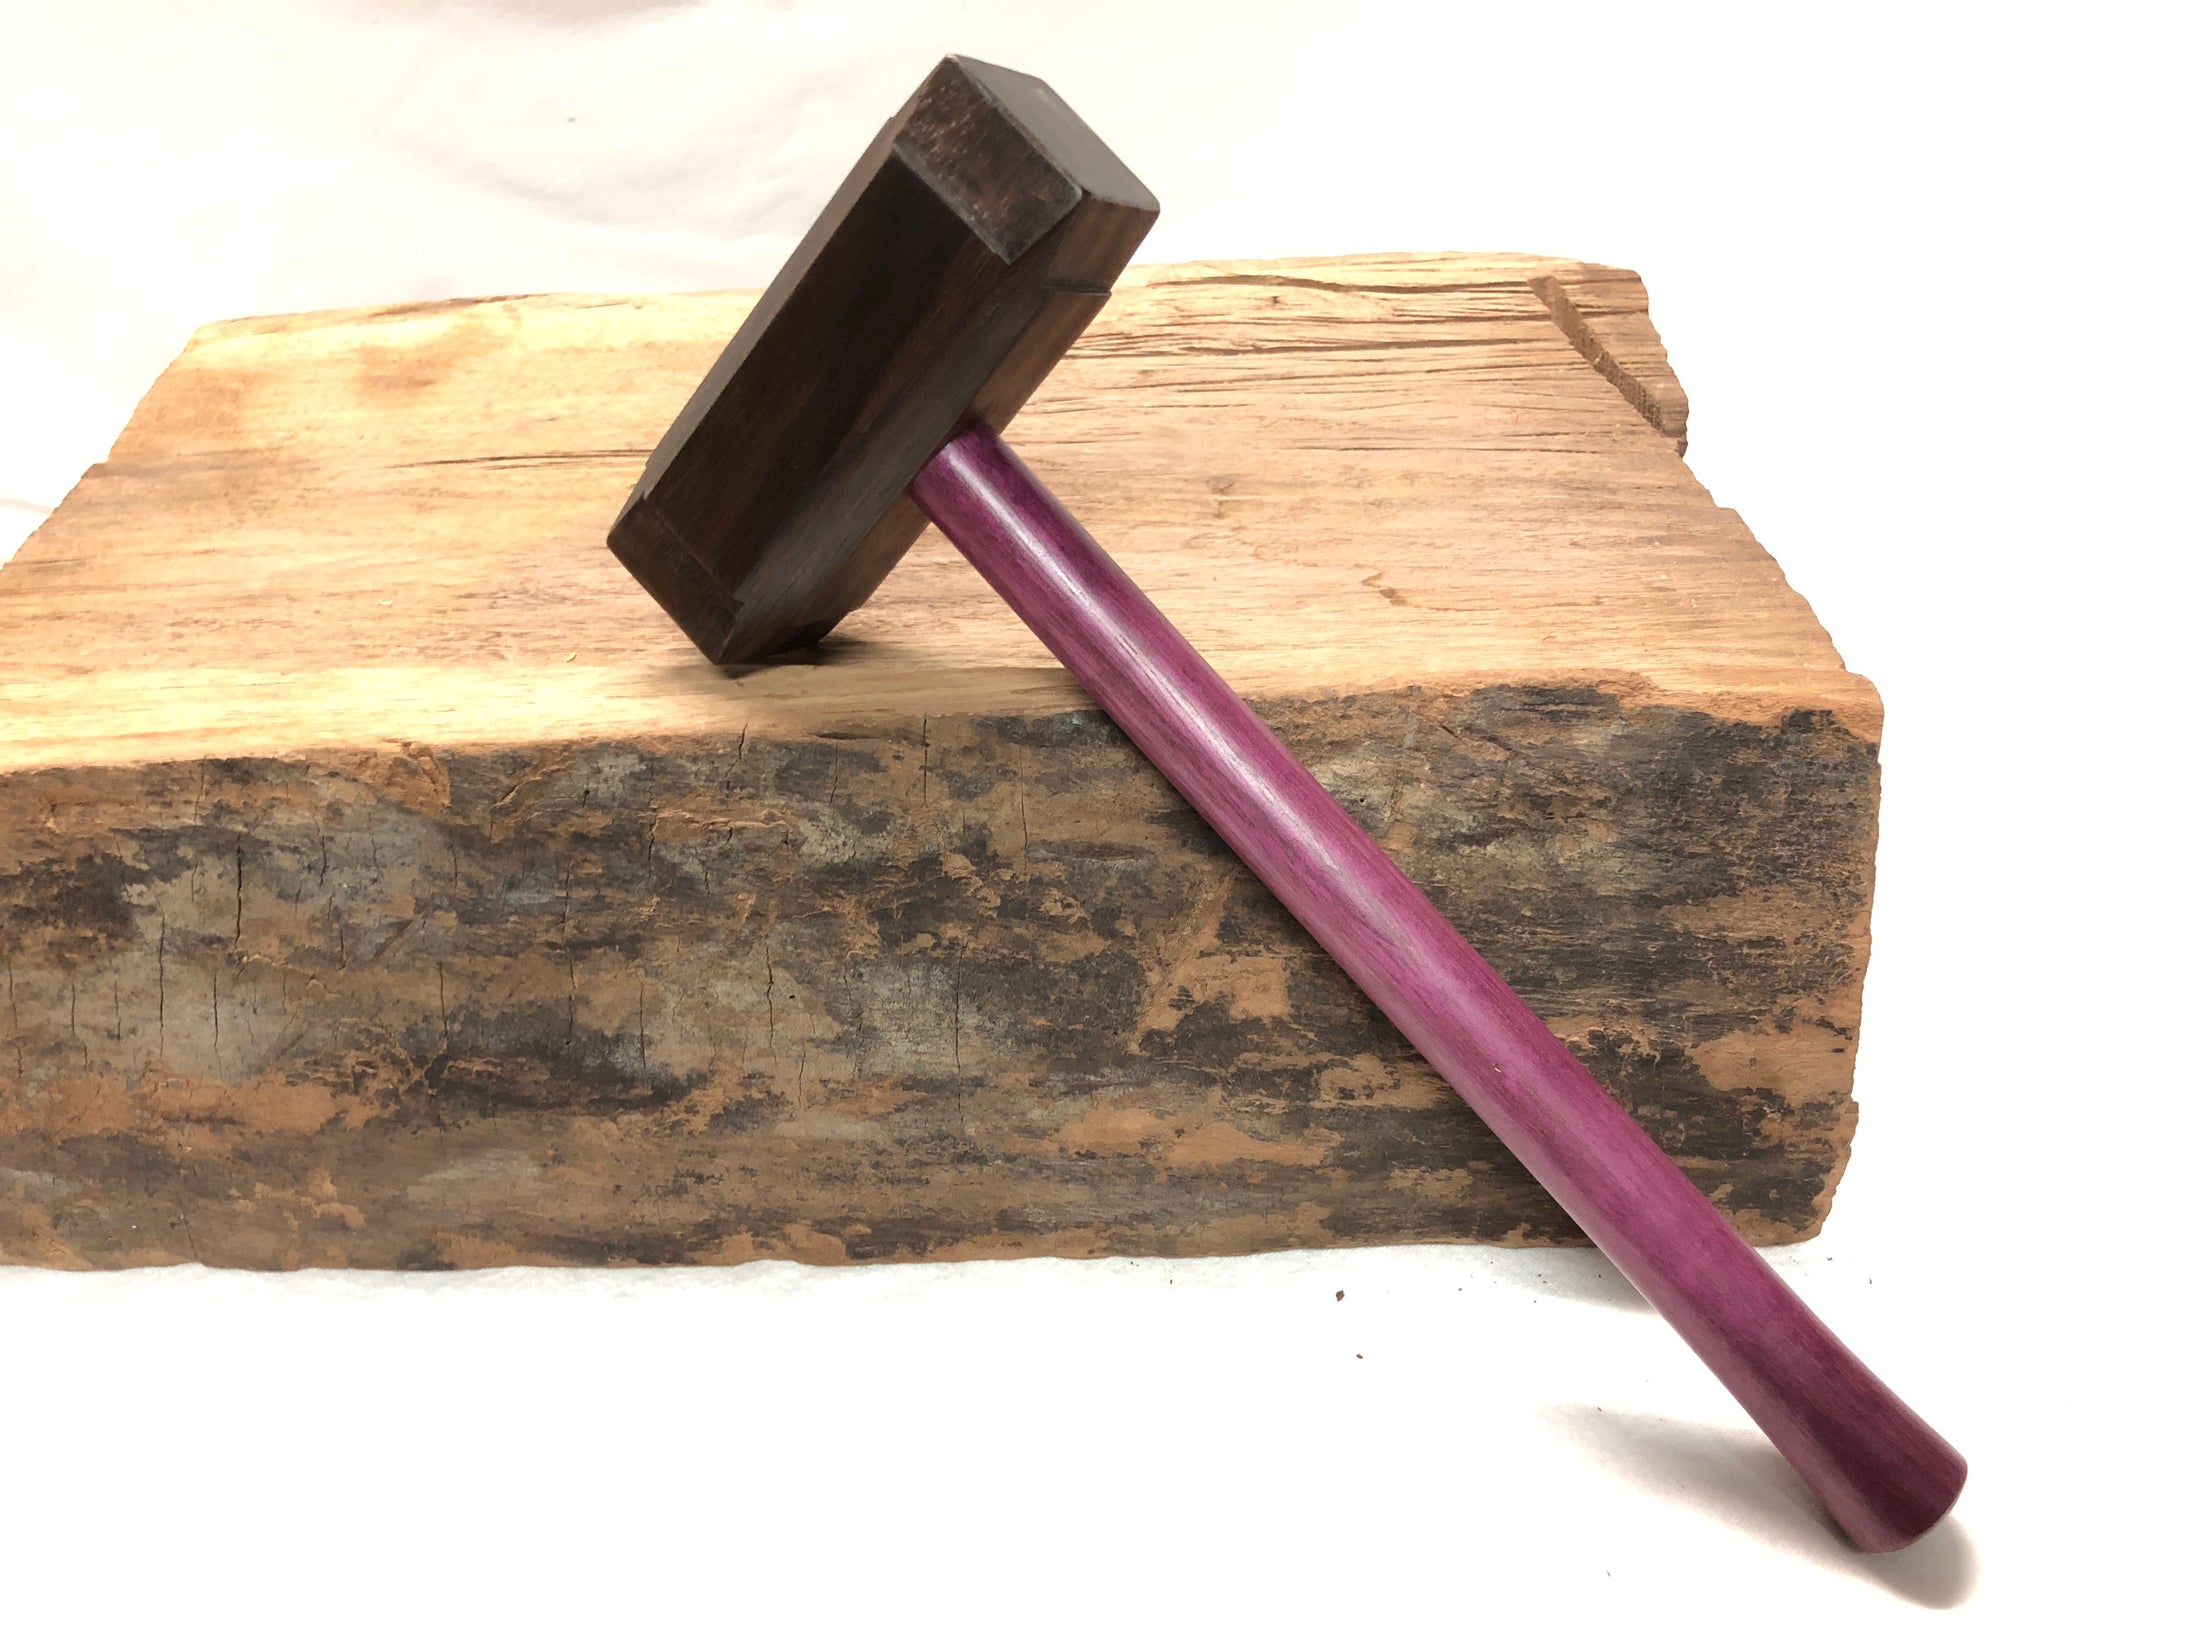 MID SIZE - Thor's Hammer Woodworking Mallet all Exotic Wood